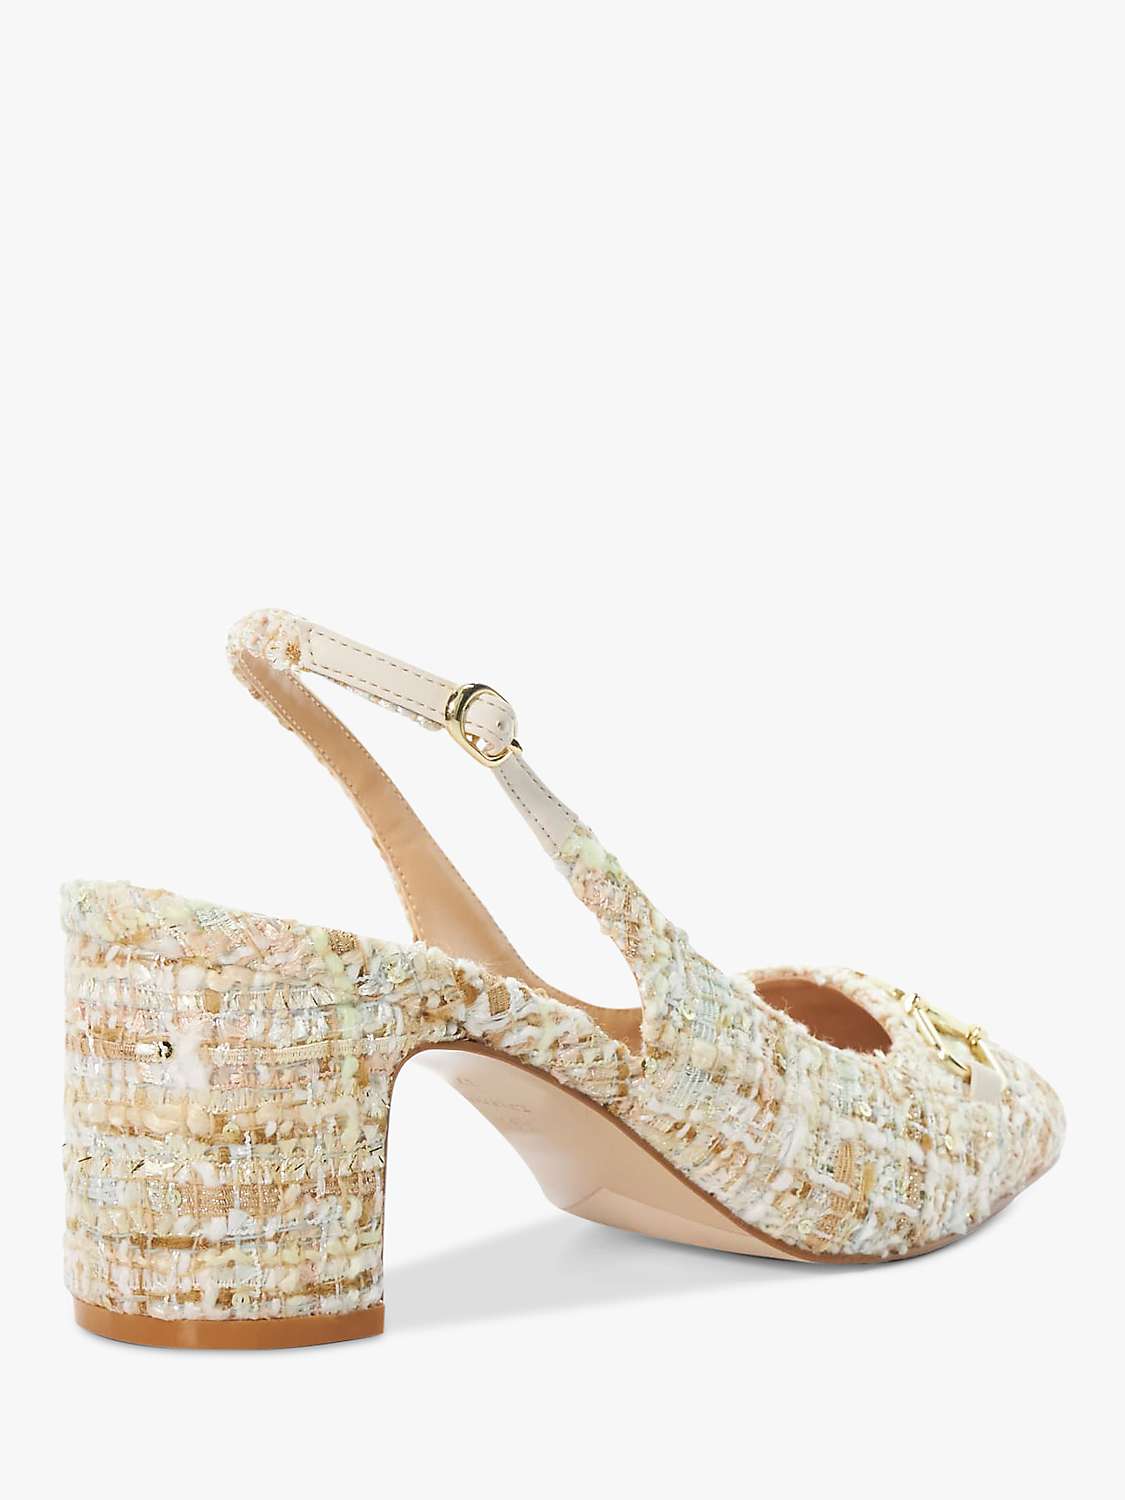 Buy Dune Choices Boucle Block Heel Slingback Shoes, Pastel Pink Online at johnlewis.com